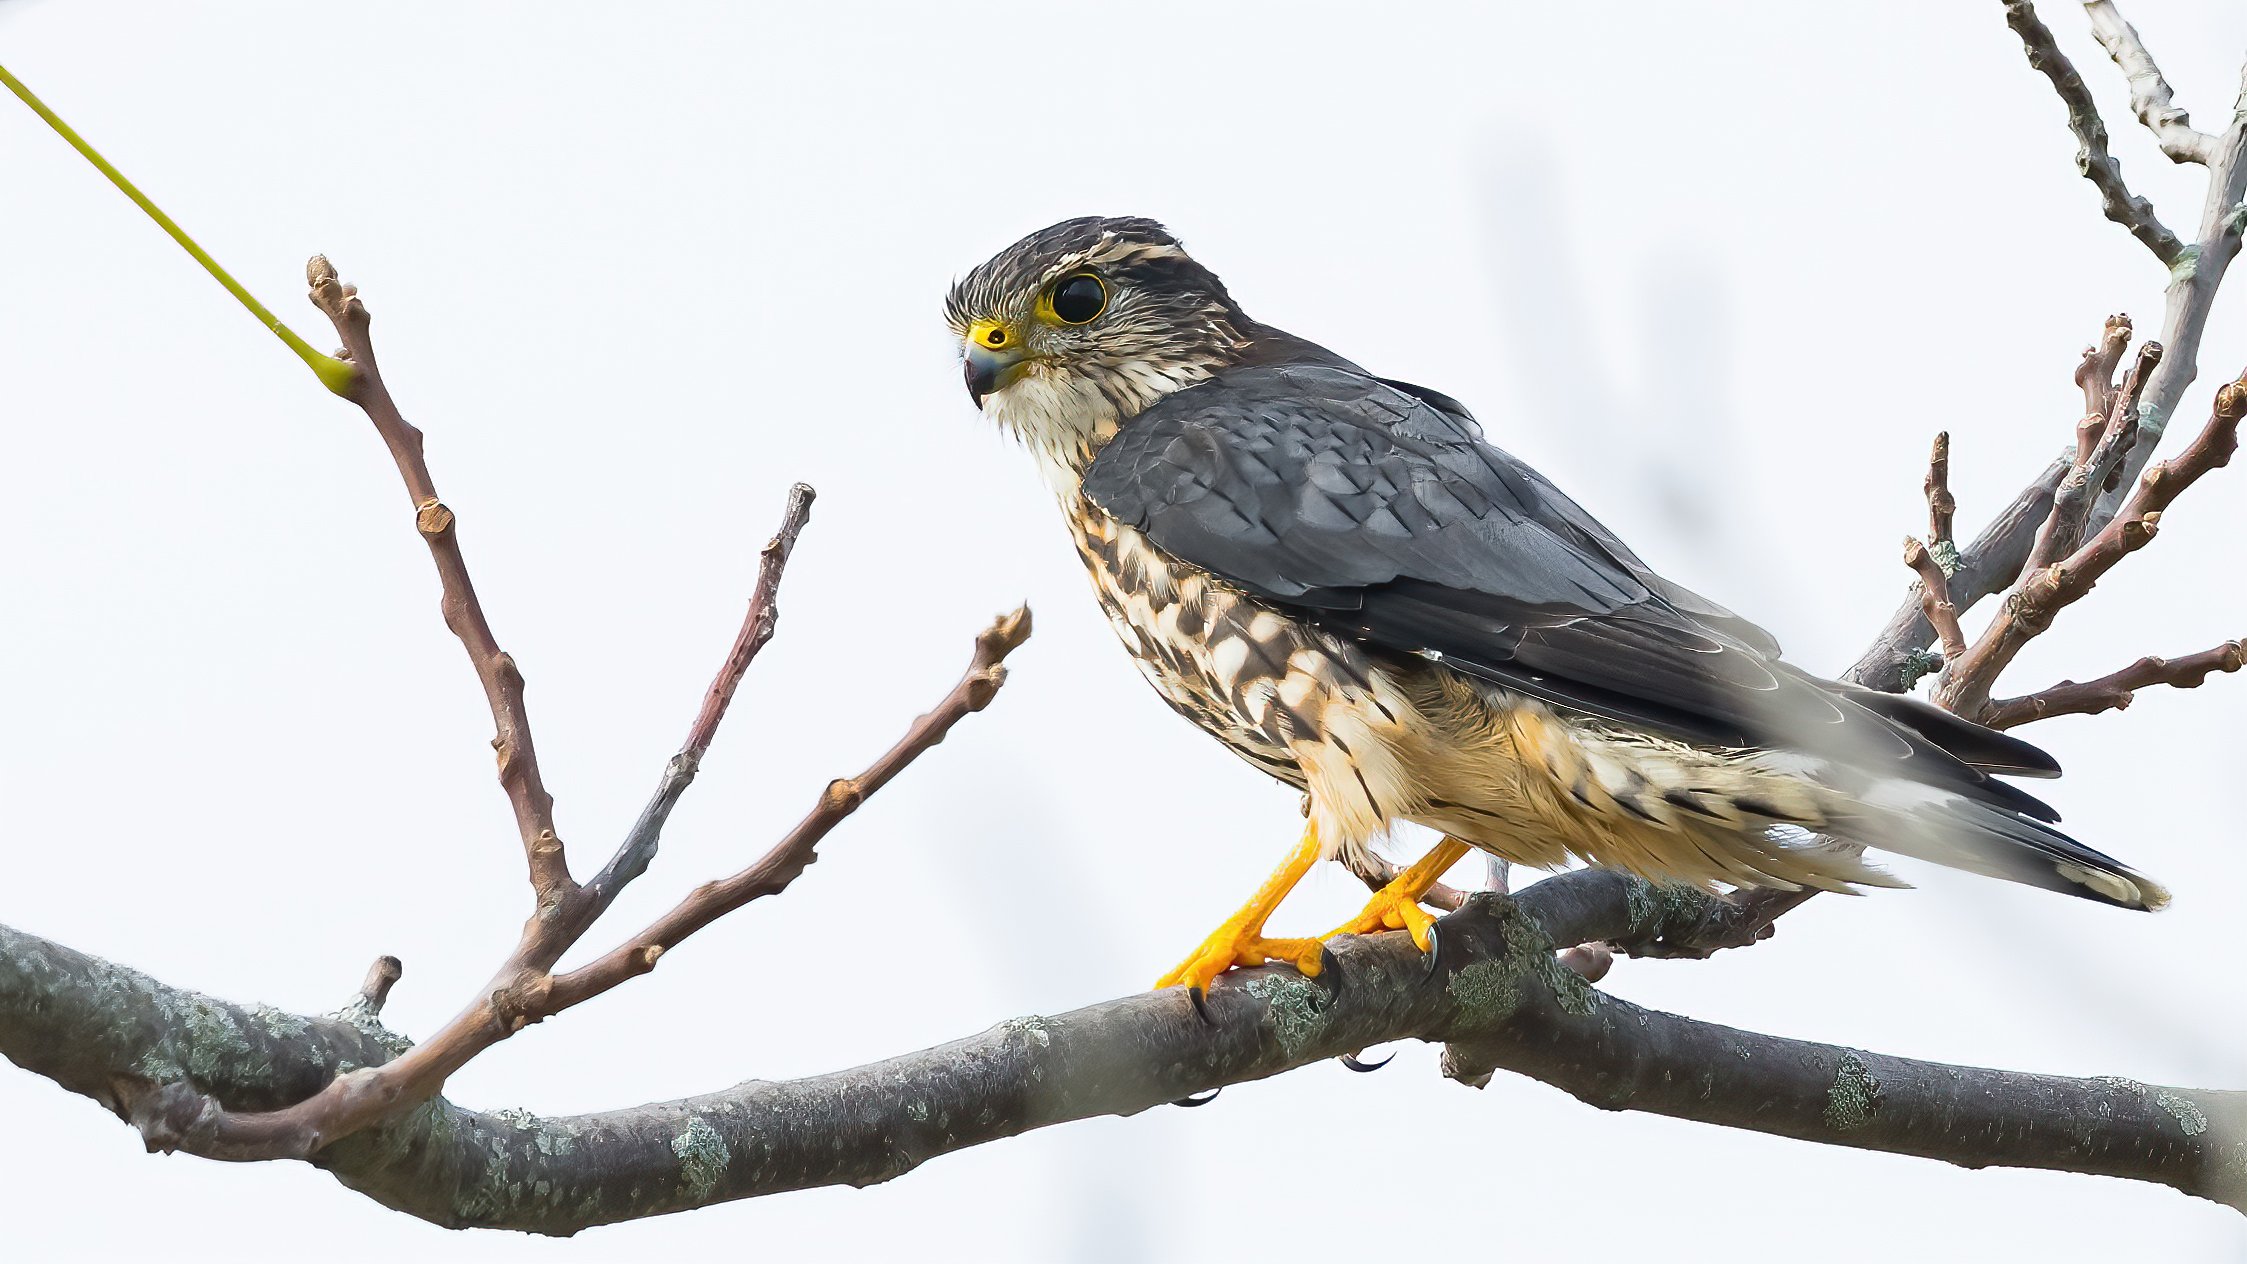 14 A merlin watches out for small birds to dine on.jpg